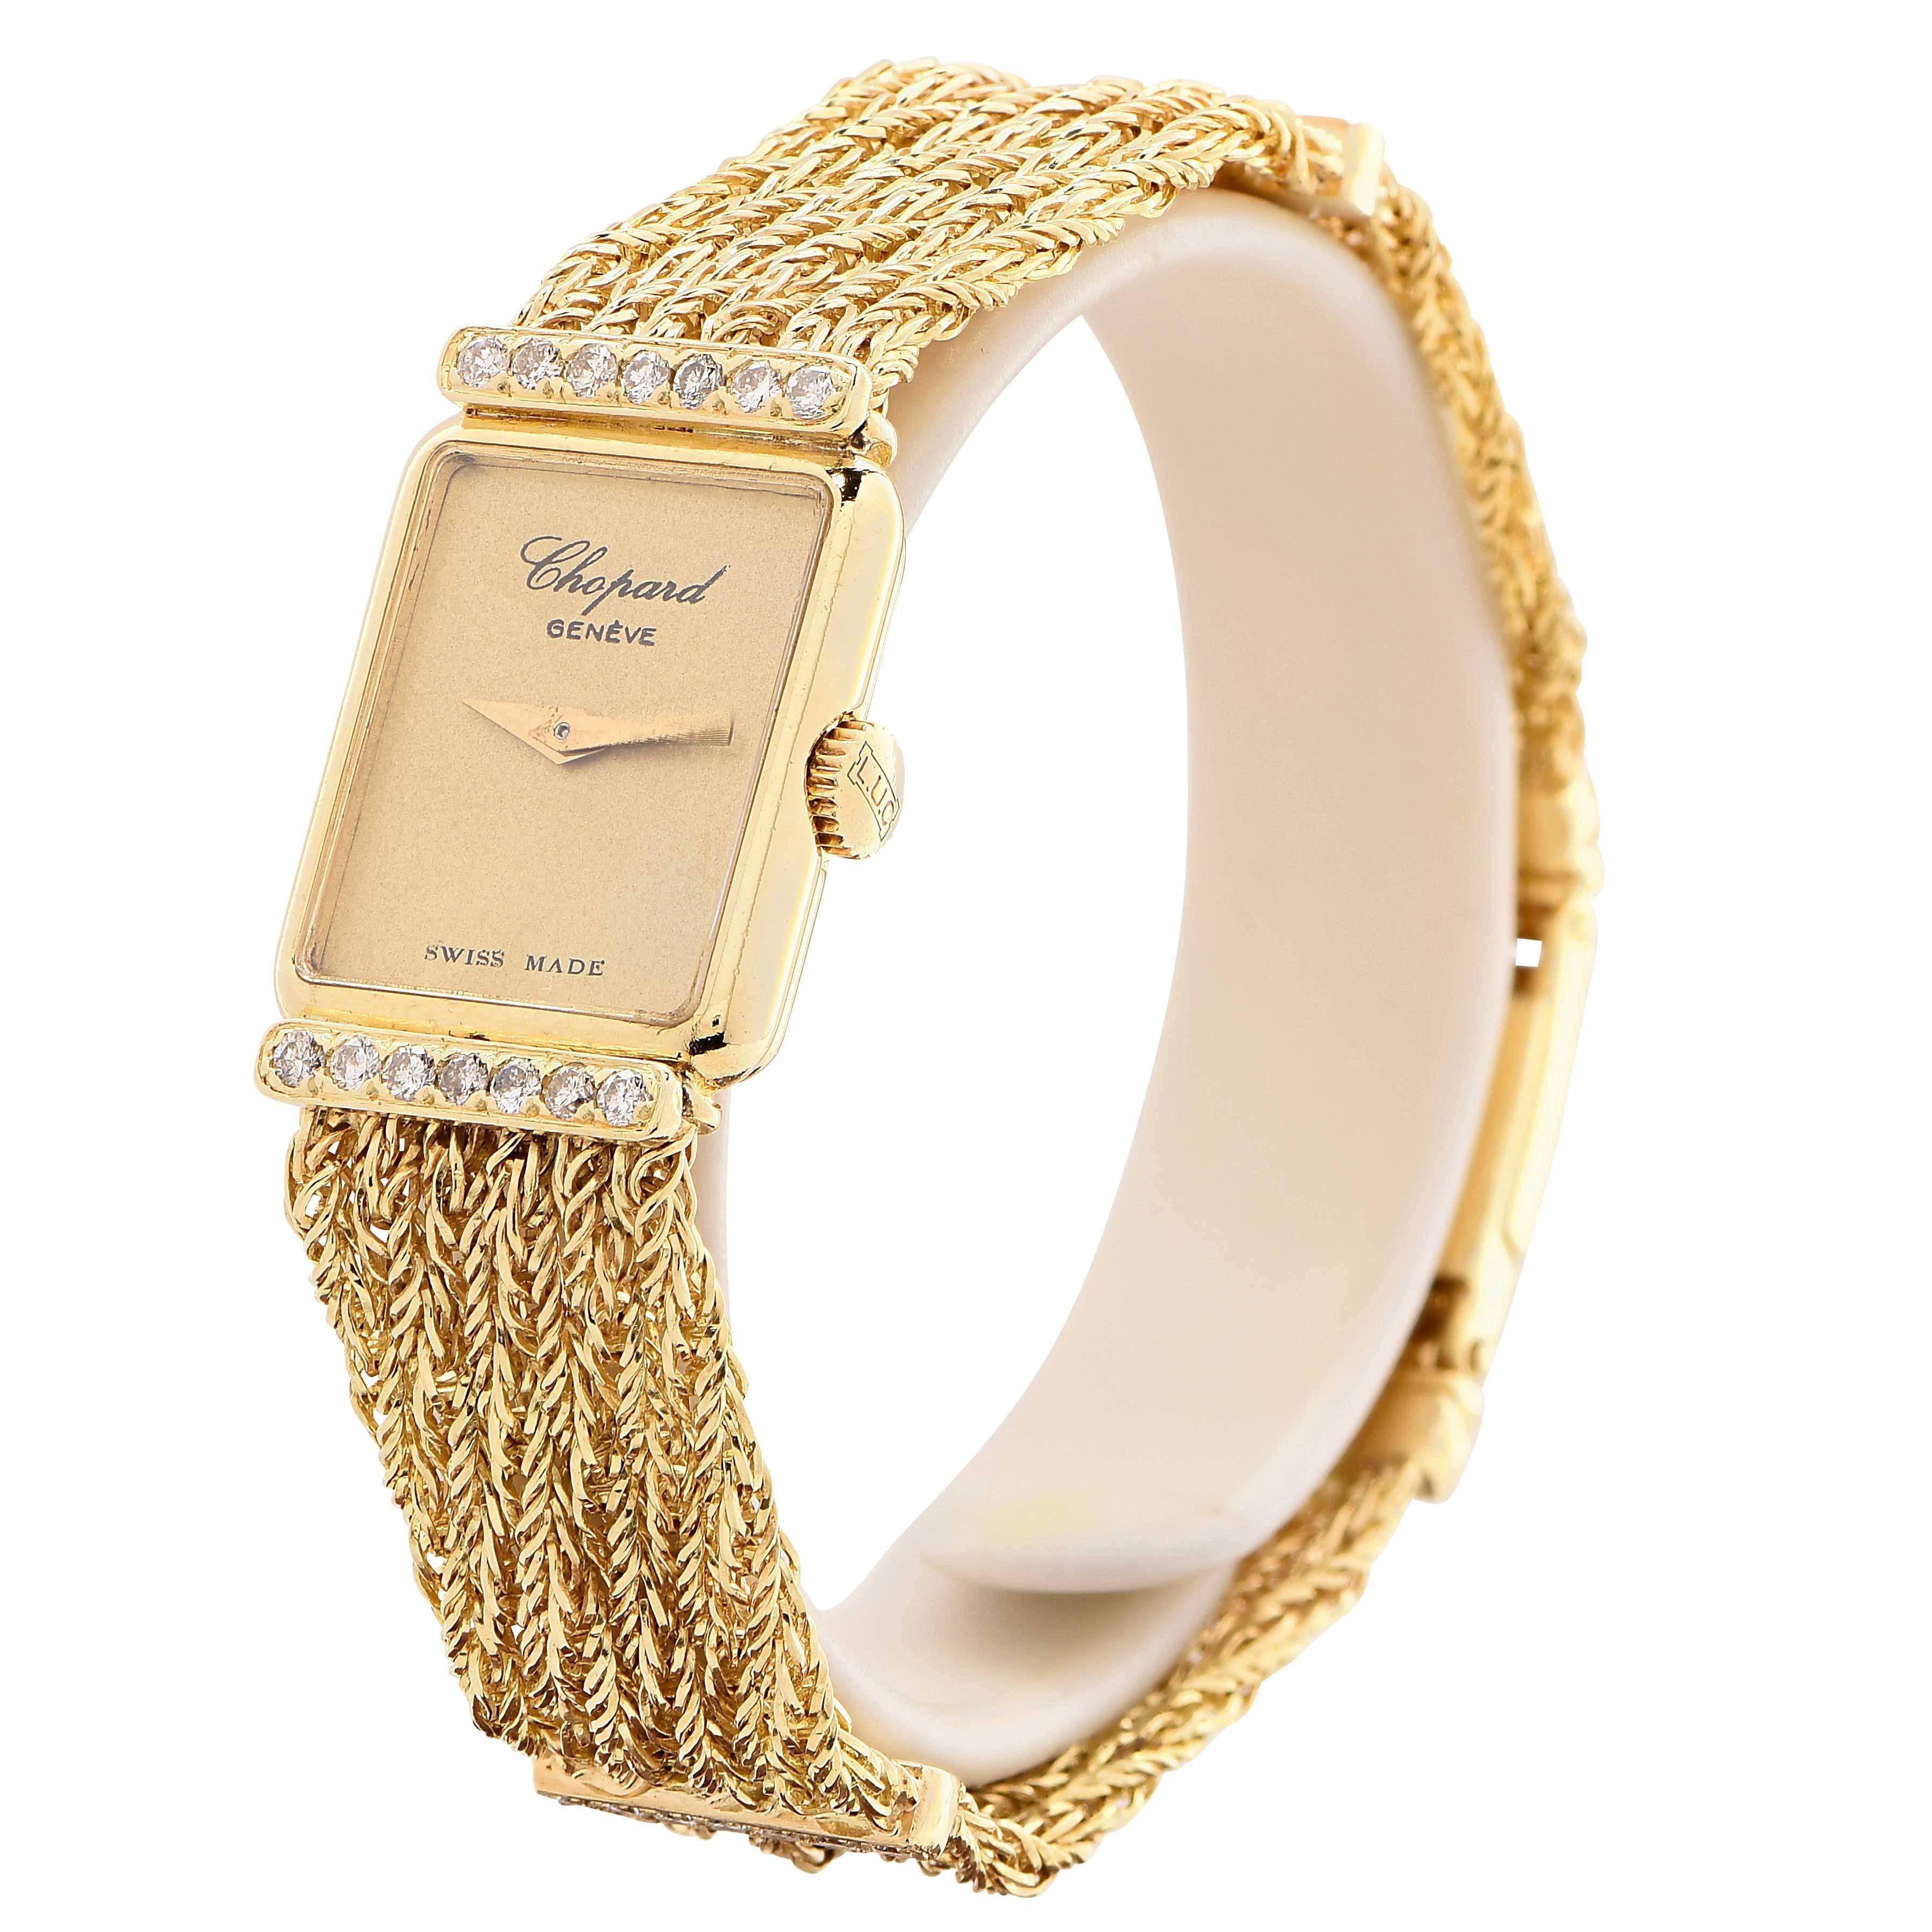 Lady's Chopard, Gold Dial 18 Karat Yellow Gold Rope Chain Bracelet with Diamonds featuring 28 Round Brilliant Cut Diamonds with an estimated weight of .40 Ct.
Mechanical Movement #846 
Bracelet is 6 Inches Long
Metal: 18 Karat Yellow Gold
Metal